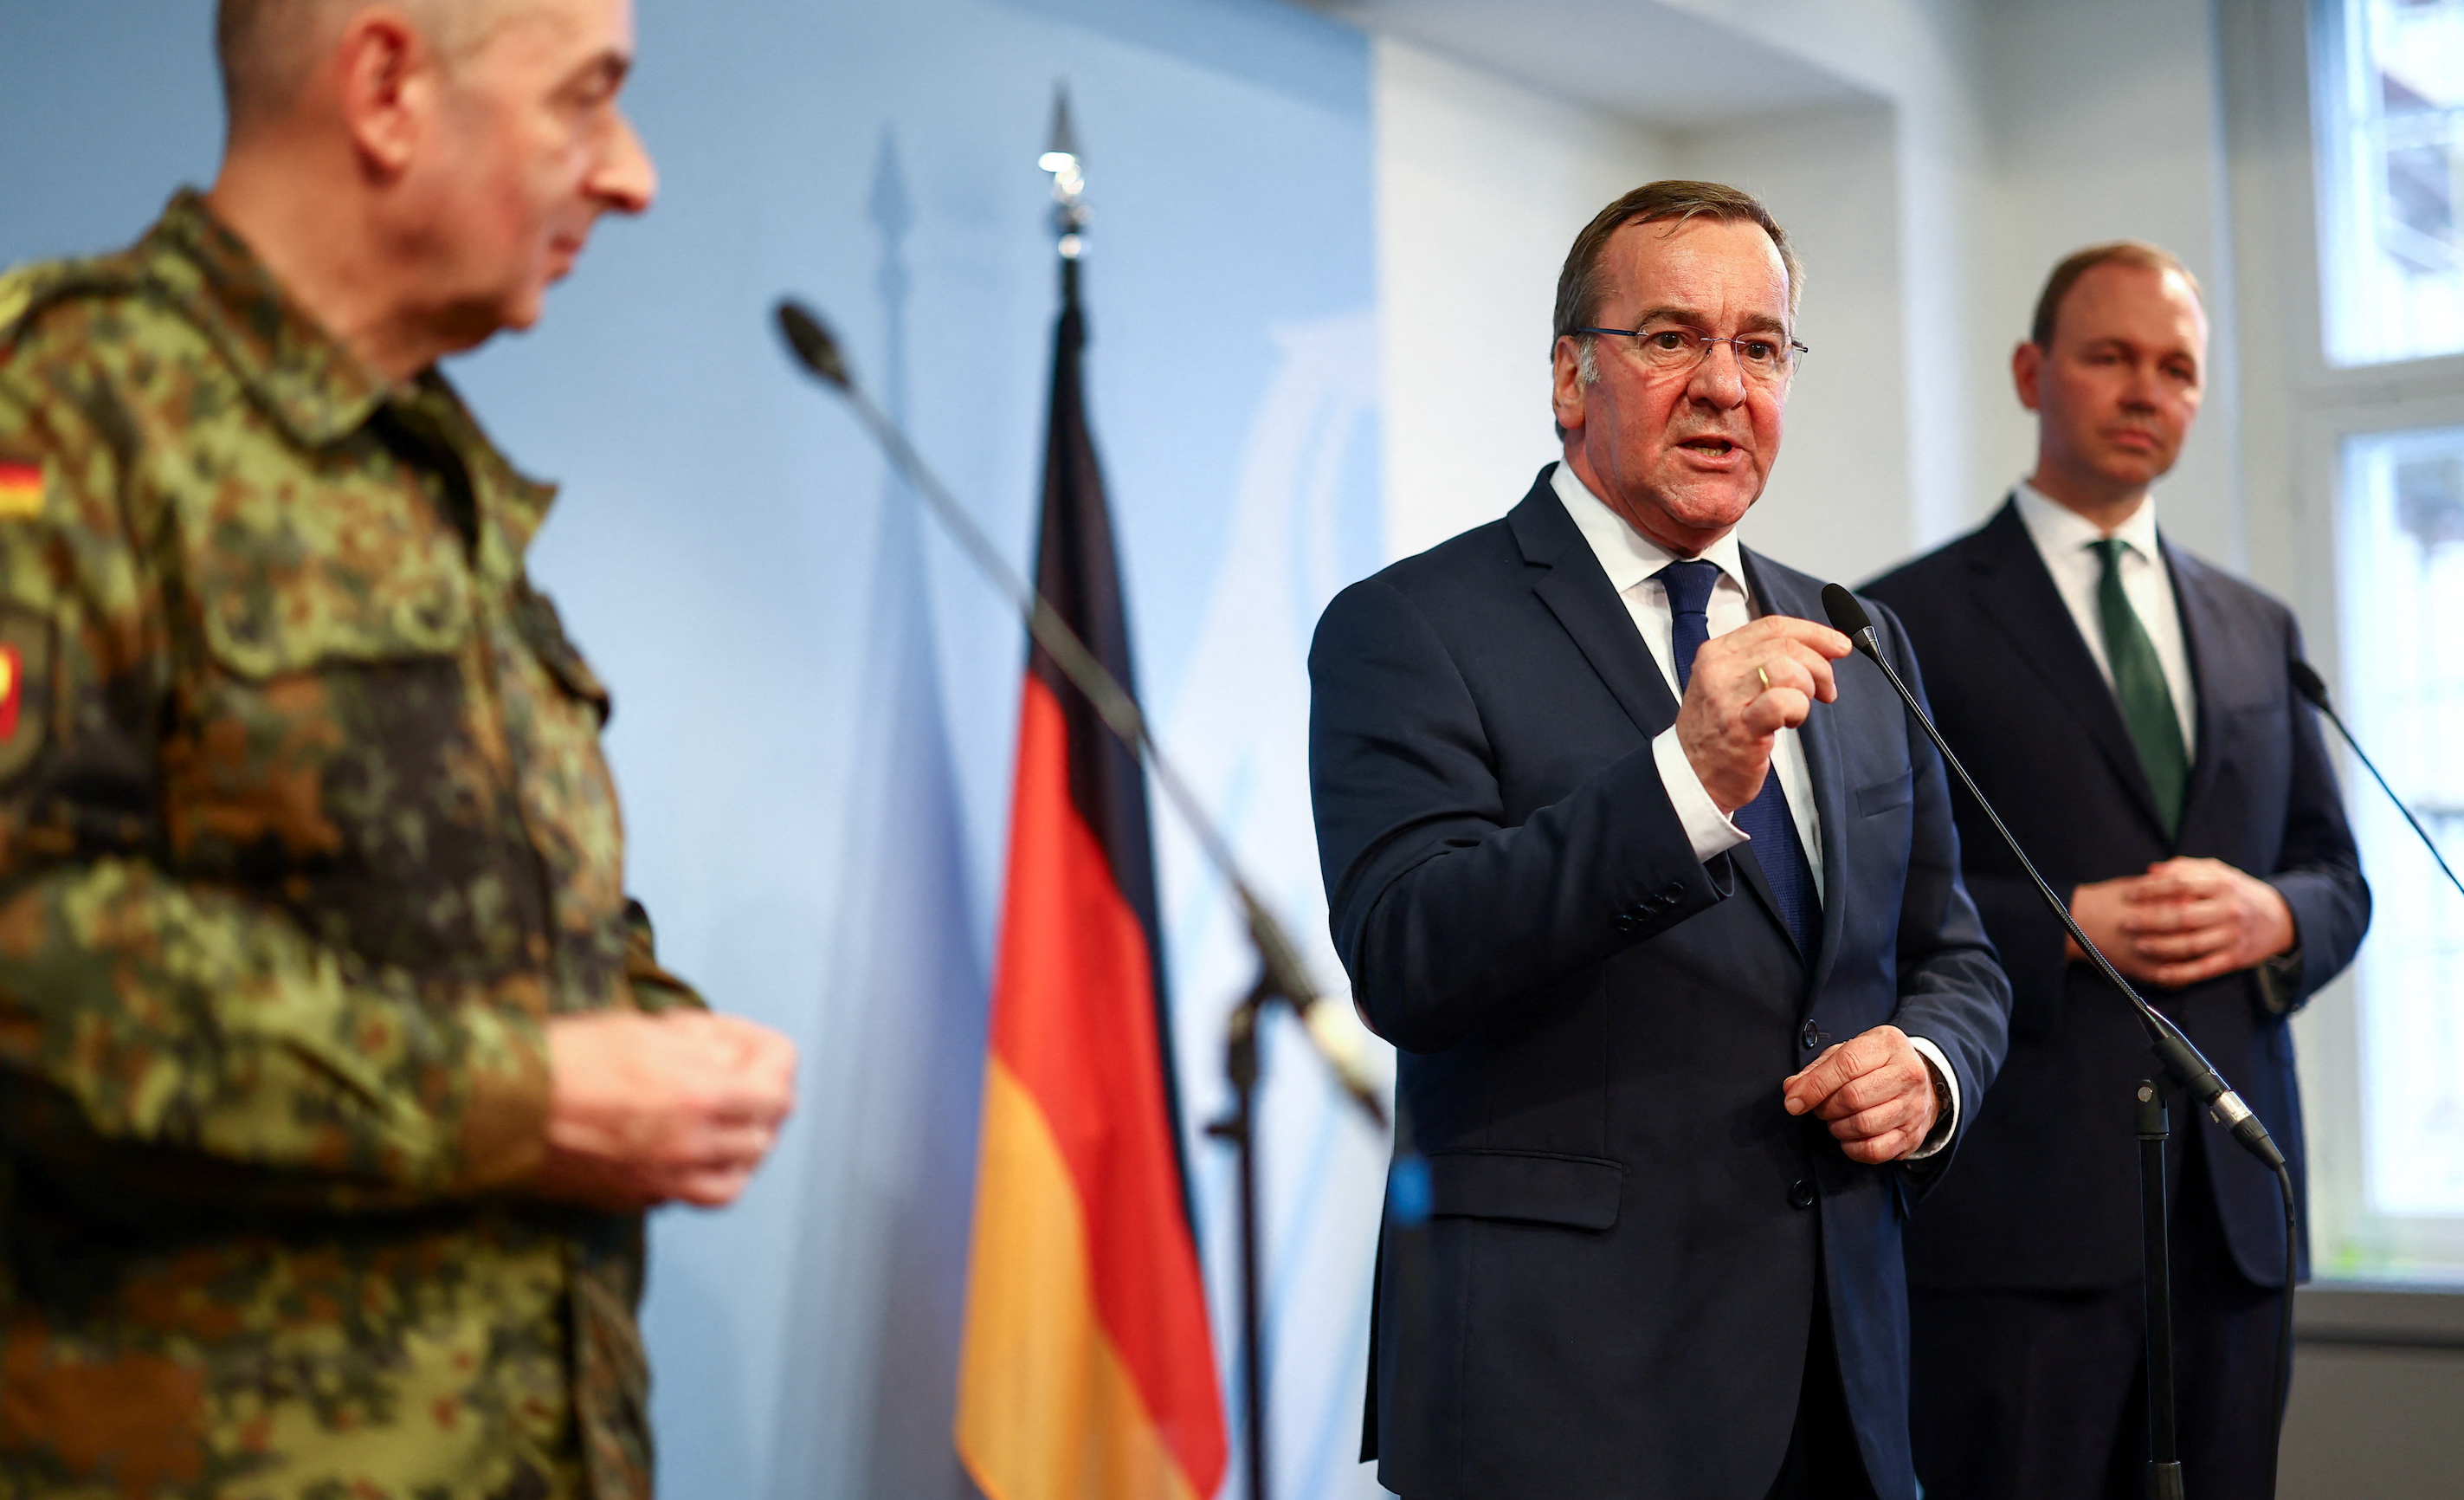 Germany announces military overhaul with eye on cyber threats